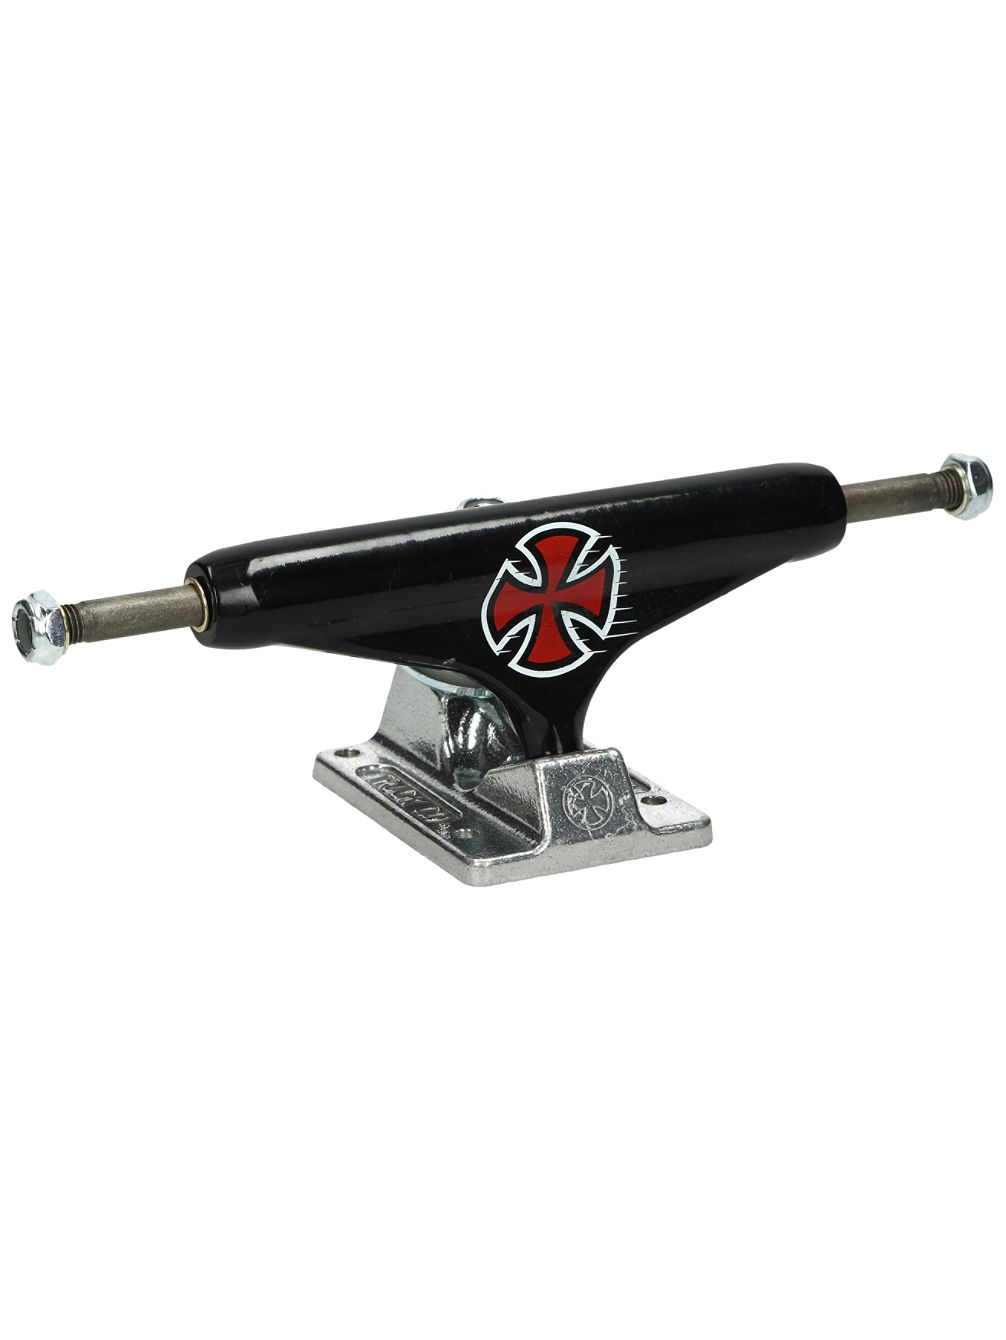 139 Stage 11 Hollow Wes Kremer Truck